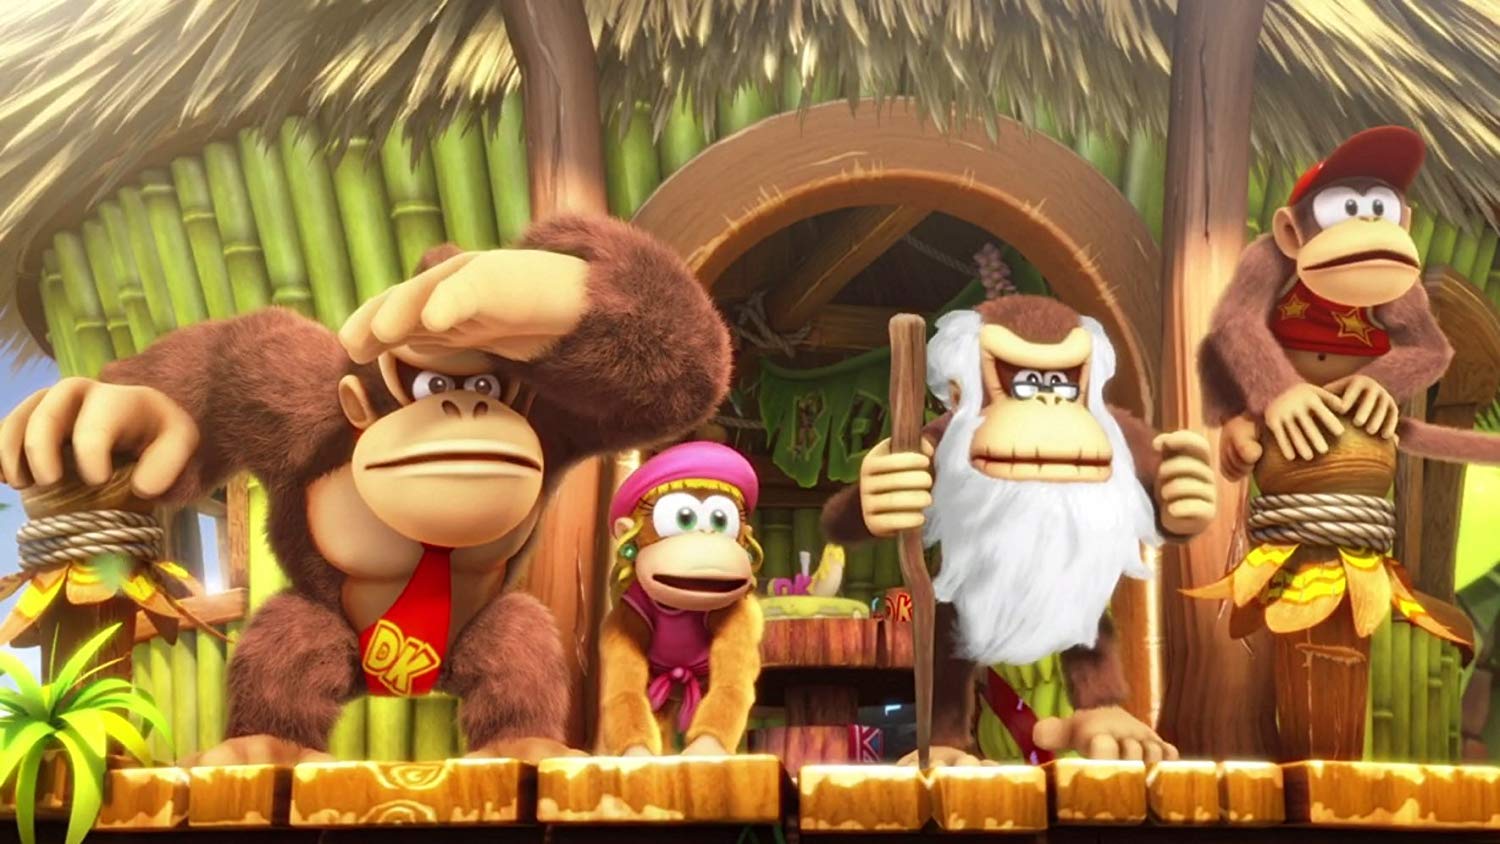 donkey kong country tropical freeze